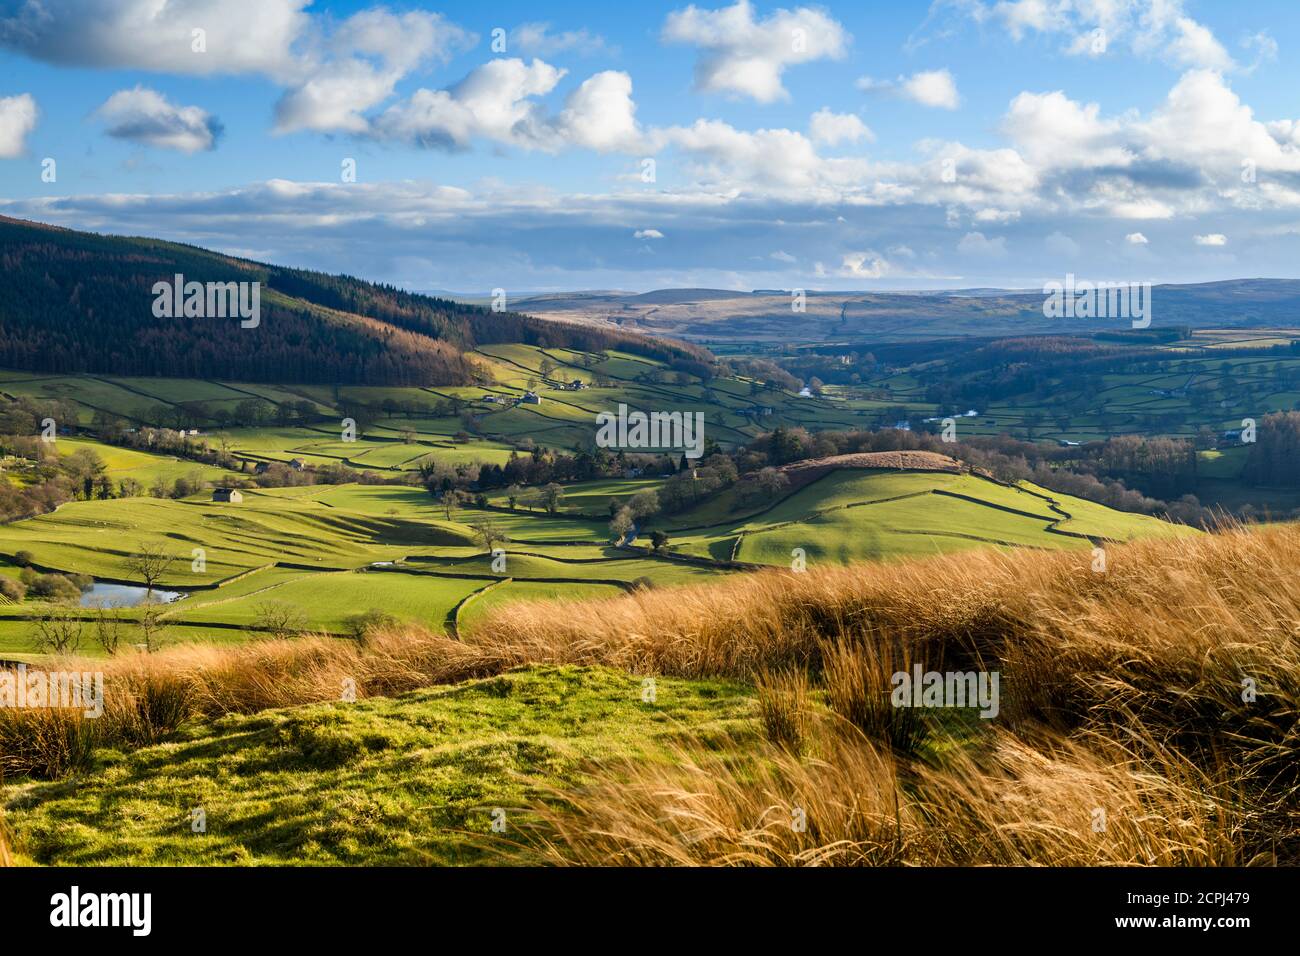 Long-distance picturesque view to Wharfedale (isolated barns, rolling green pasture, sunlit valley, walls, blue sky) - Yorkshire Dales, England, UK. Stock Photo